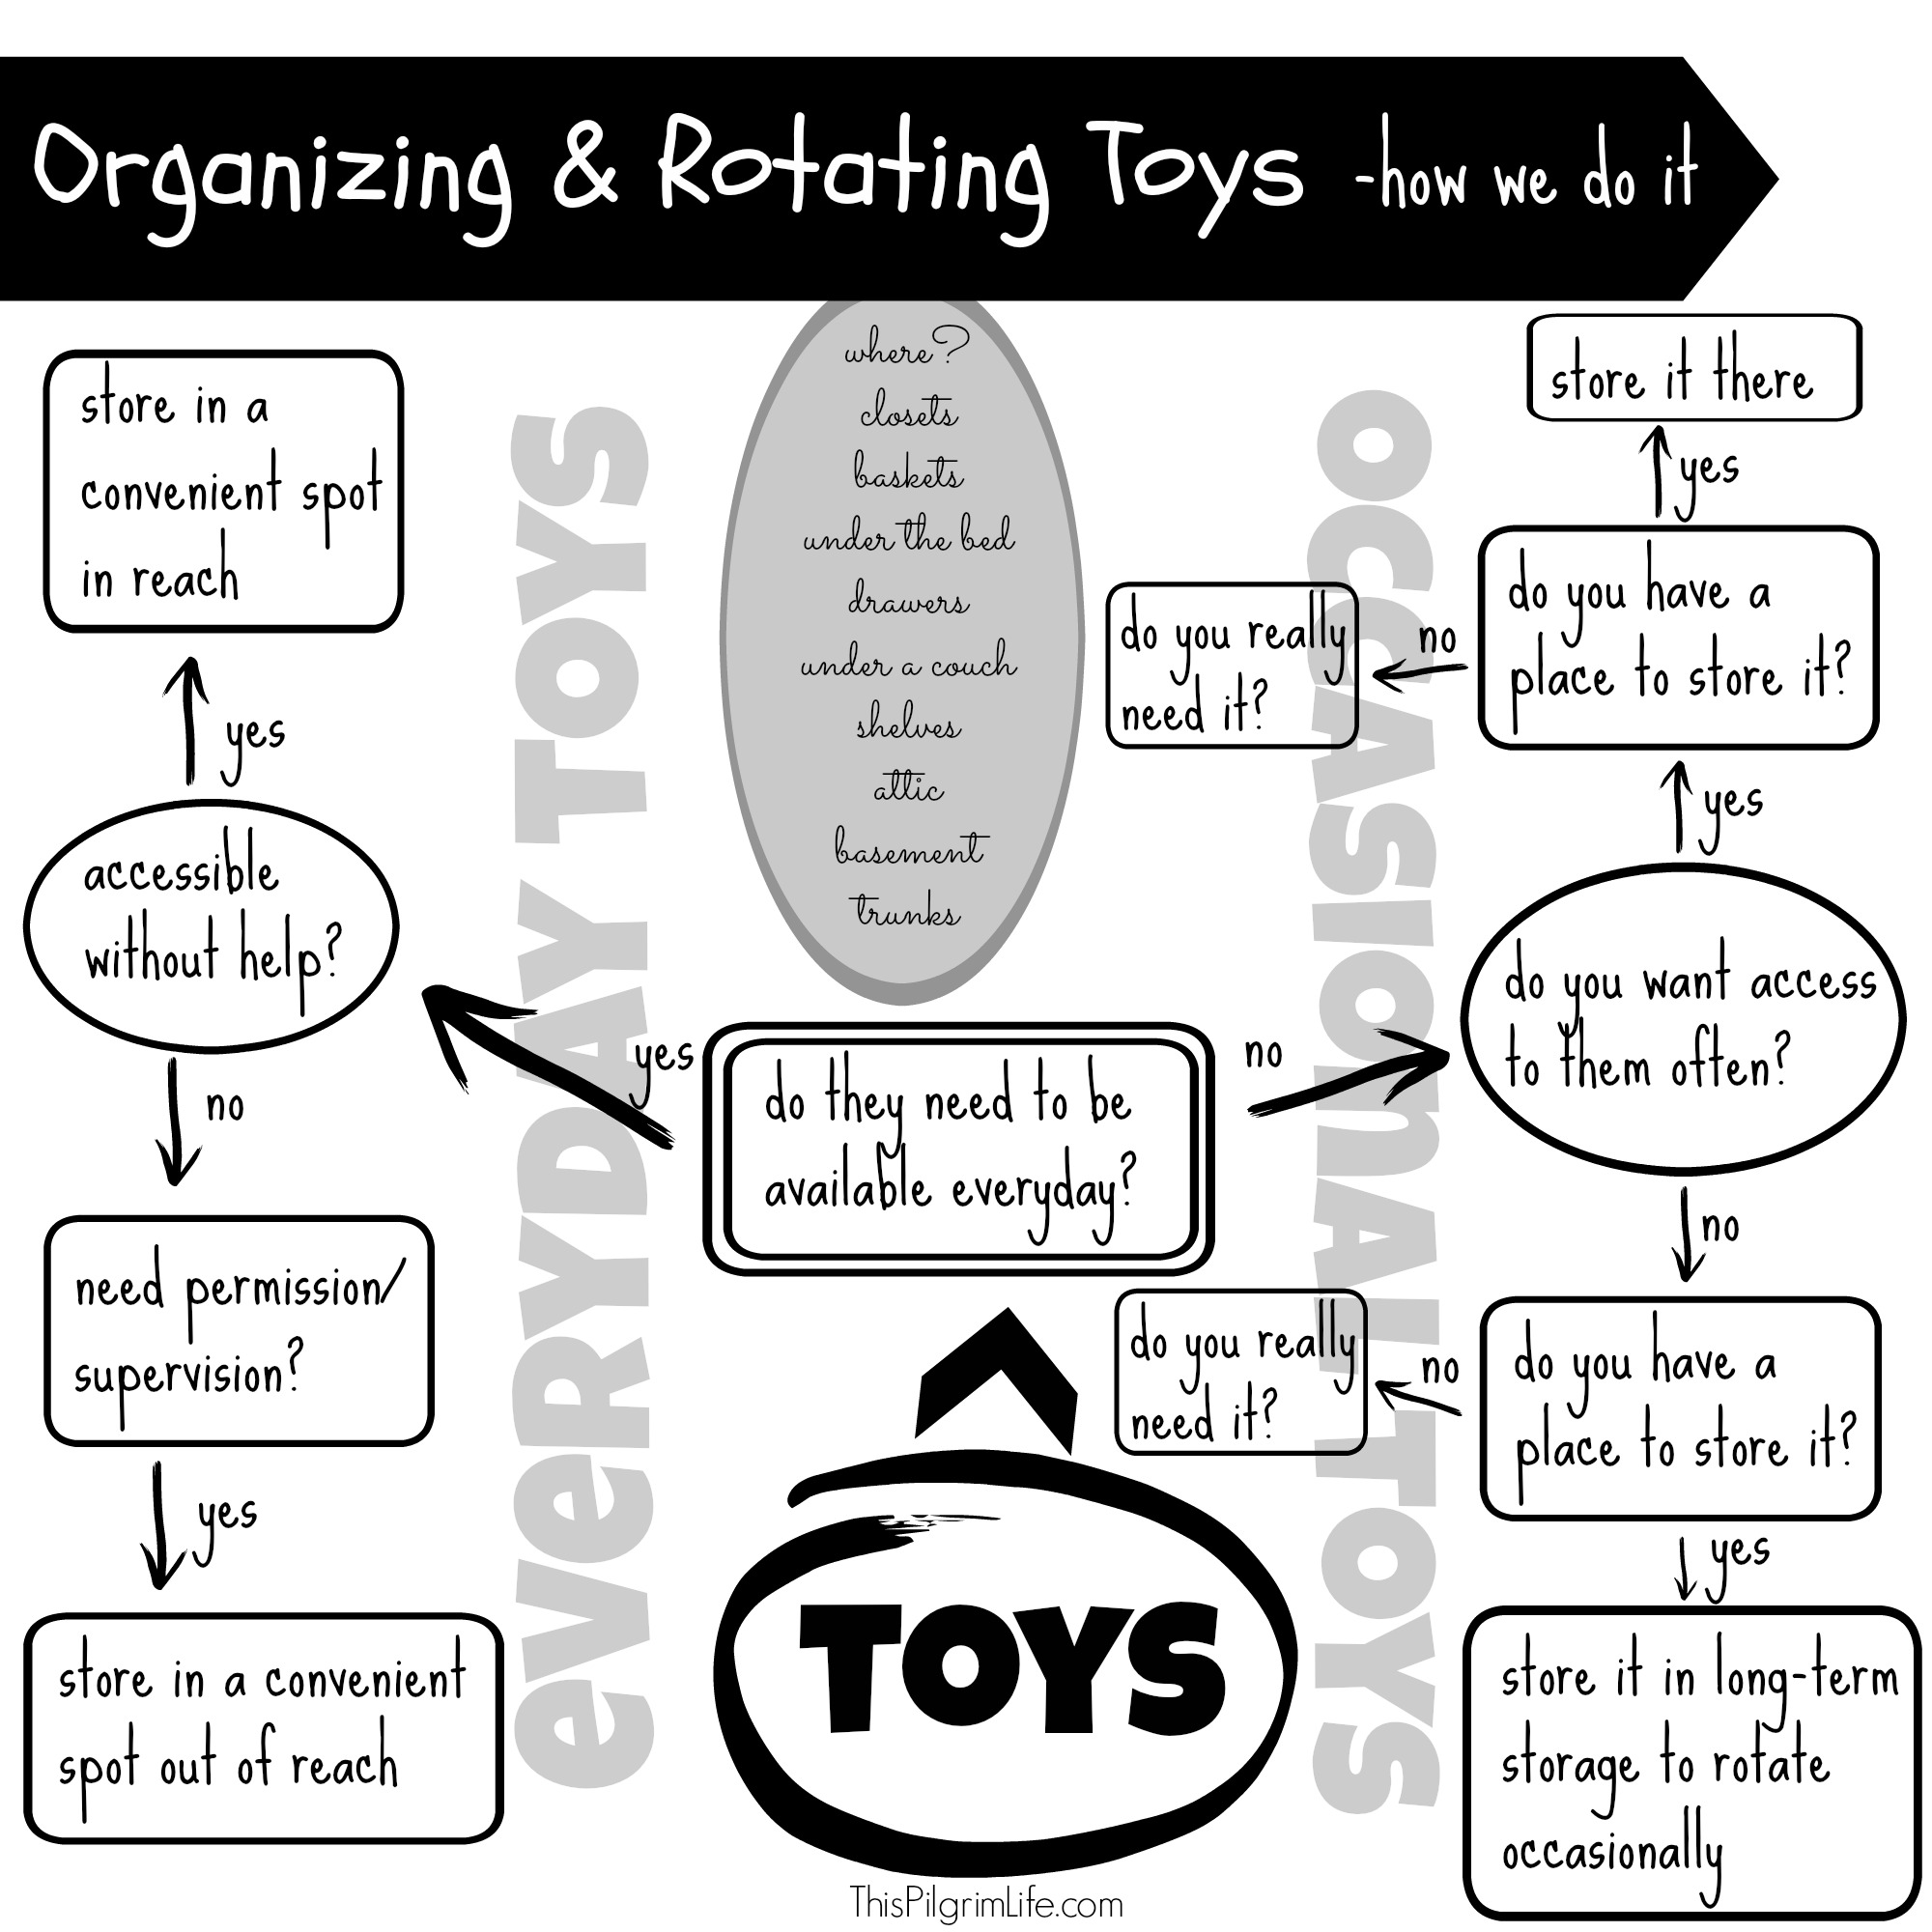 Toy Organization and Rotation- How We Do It